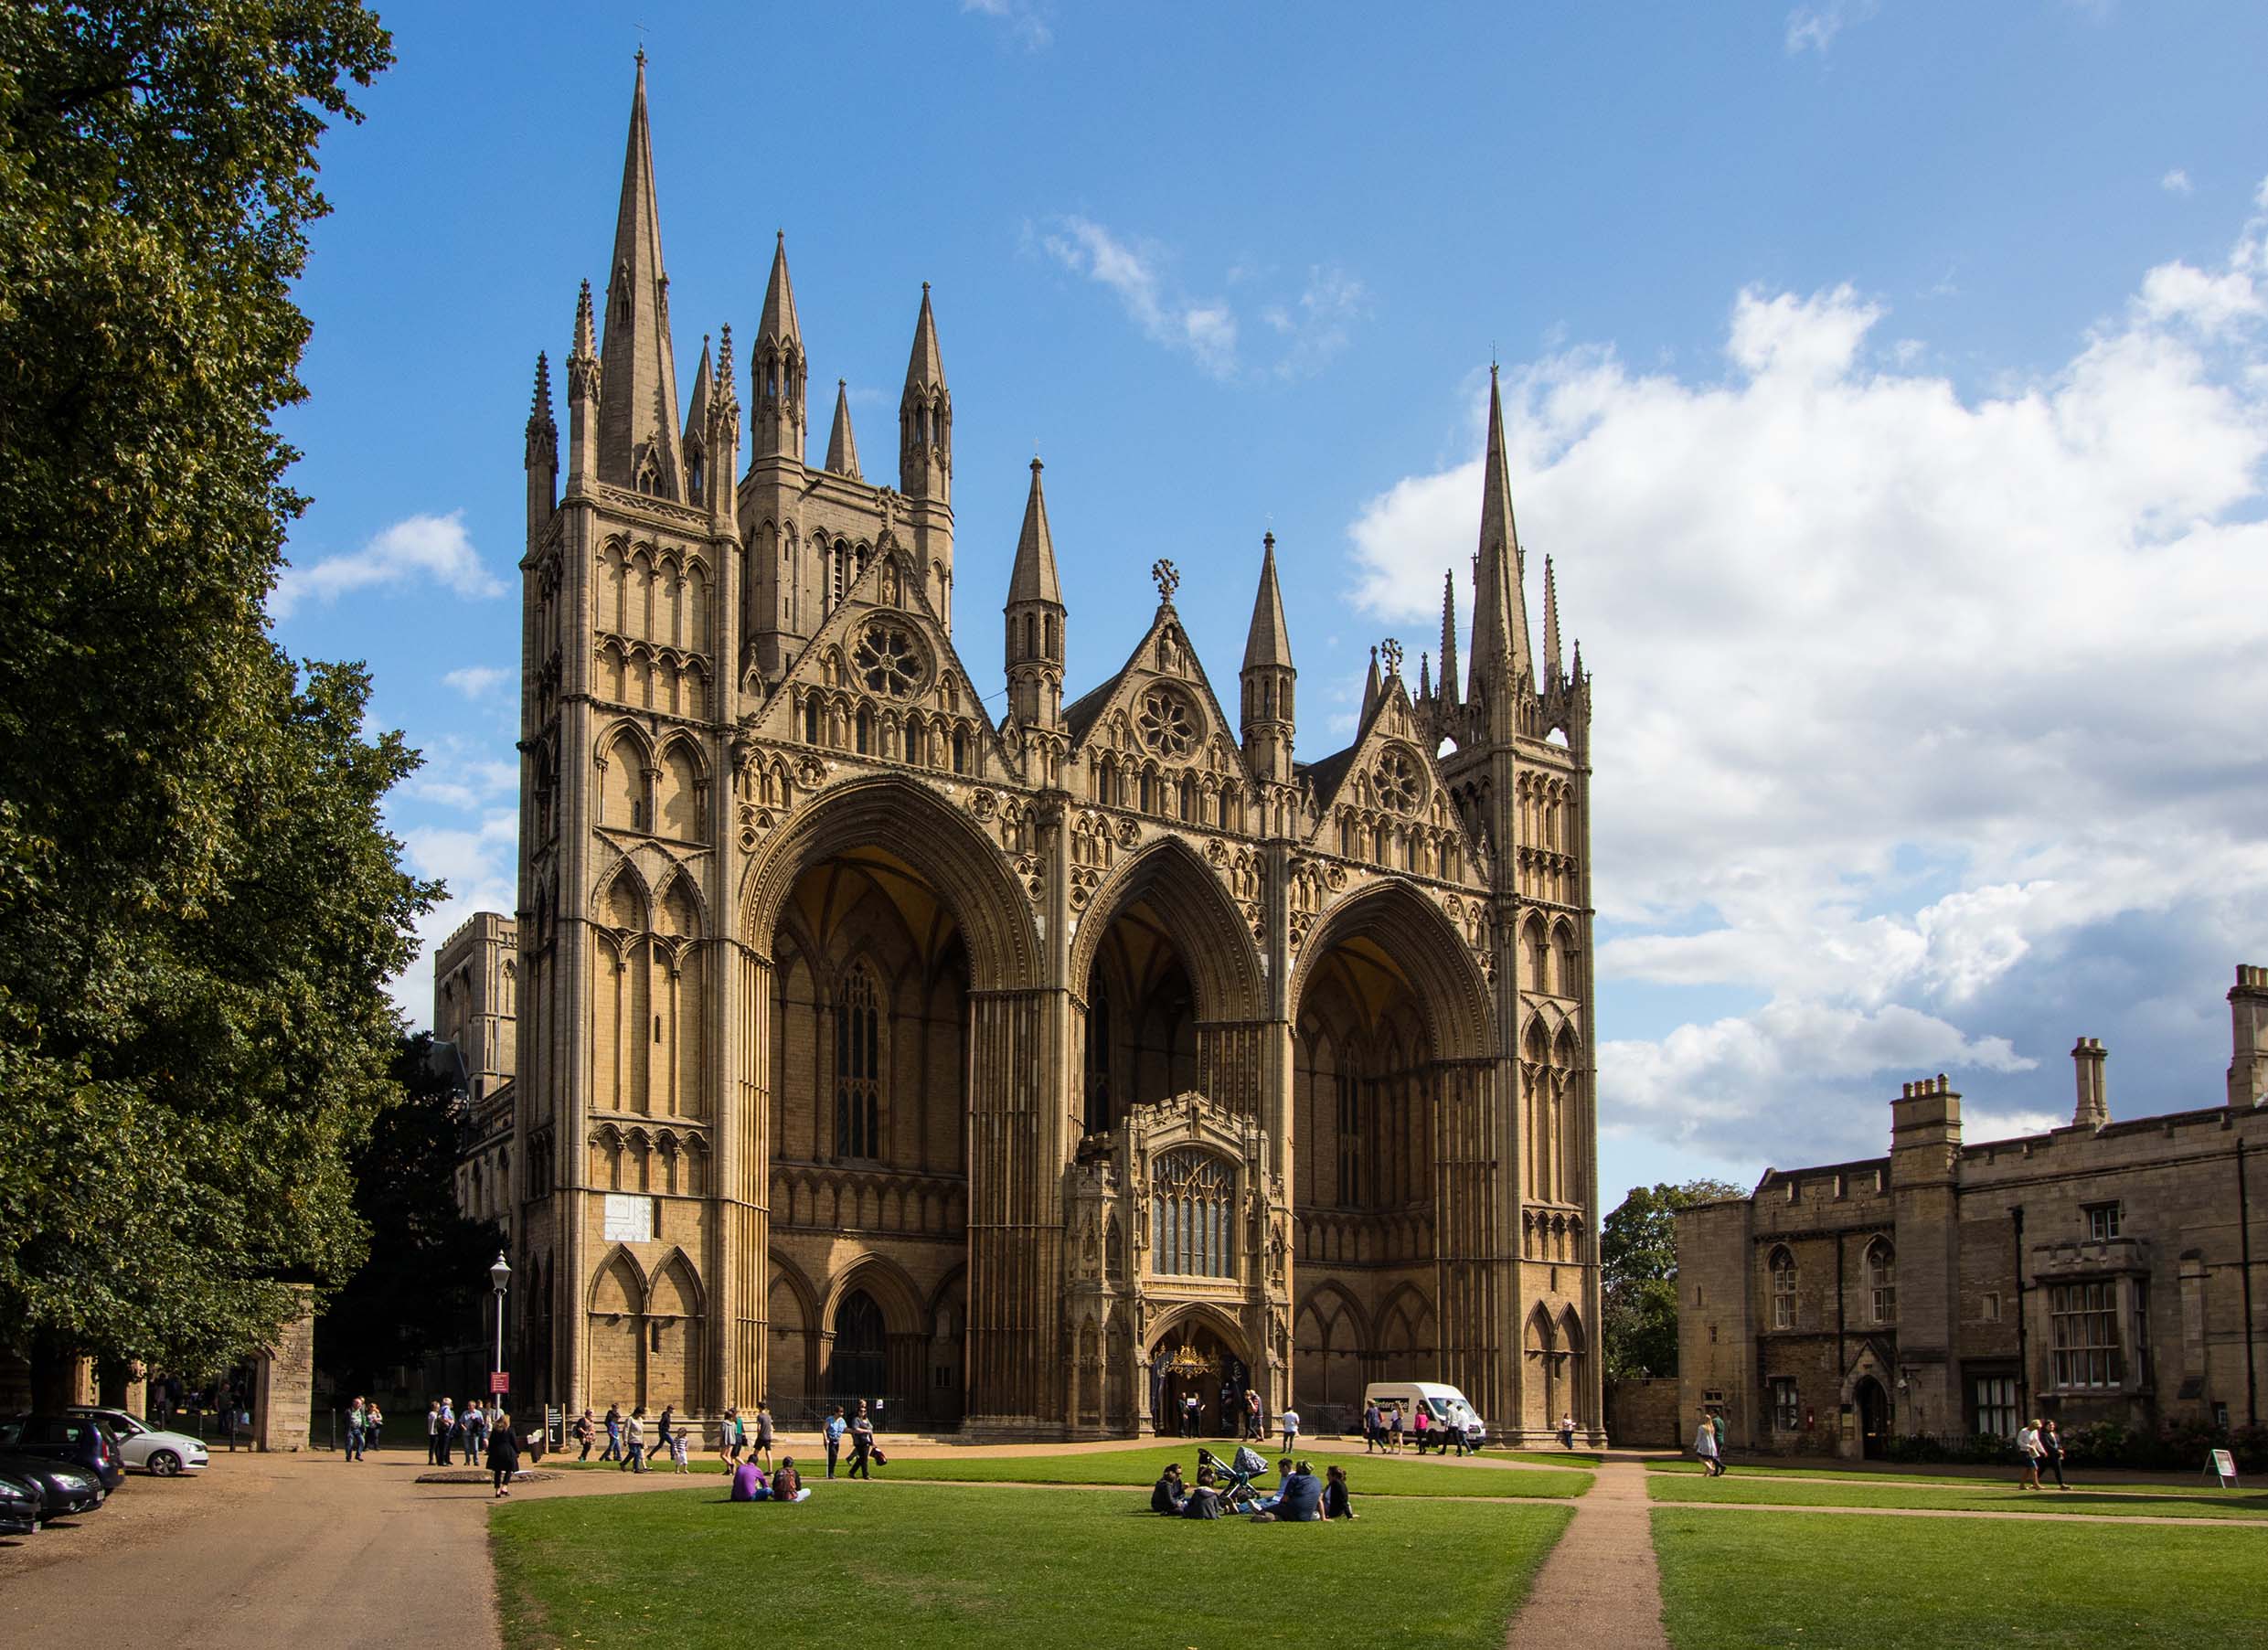 View of the Cathedral Church of St Peter, St Paul and St Andrew, Peterborough. Image: Shutterstock.